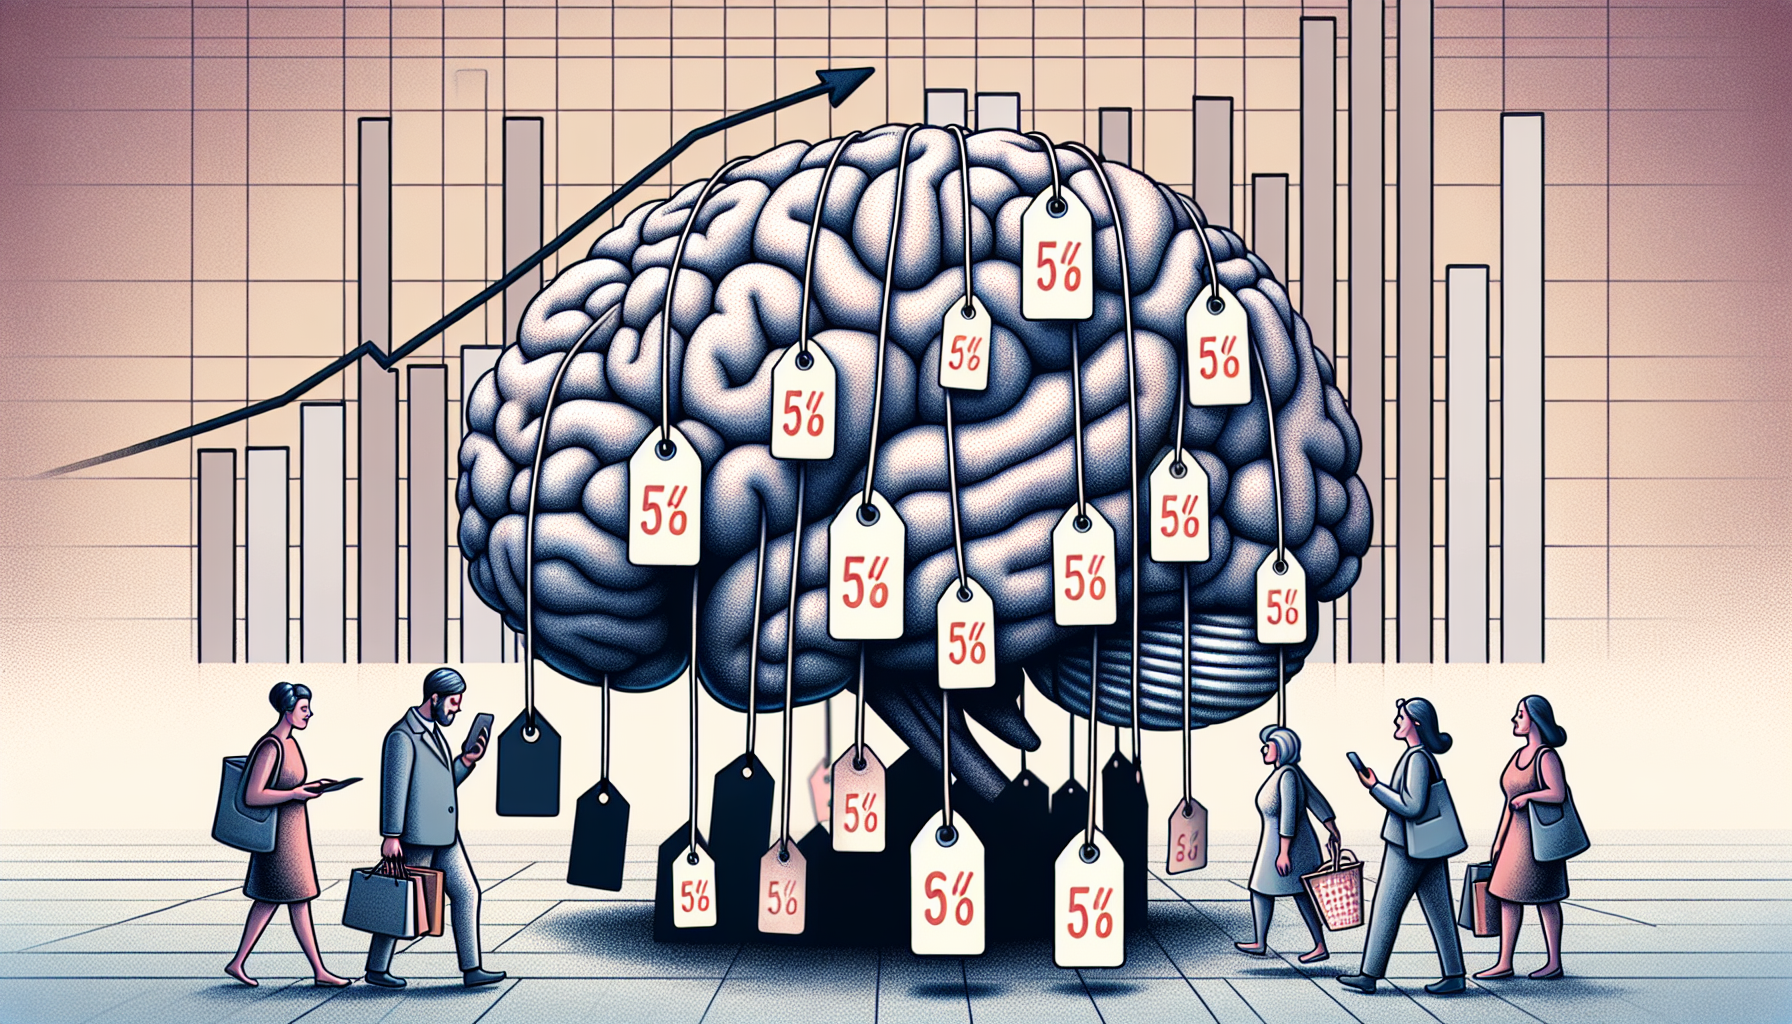 Artistic depiction of psychological pricing techniques